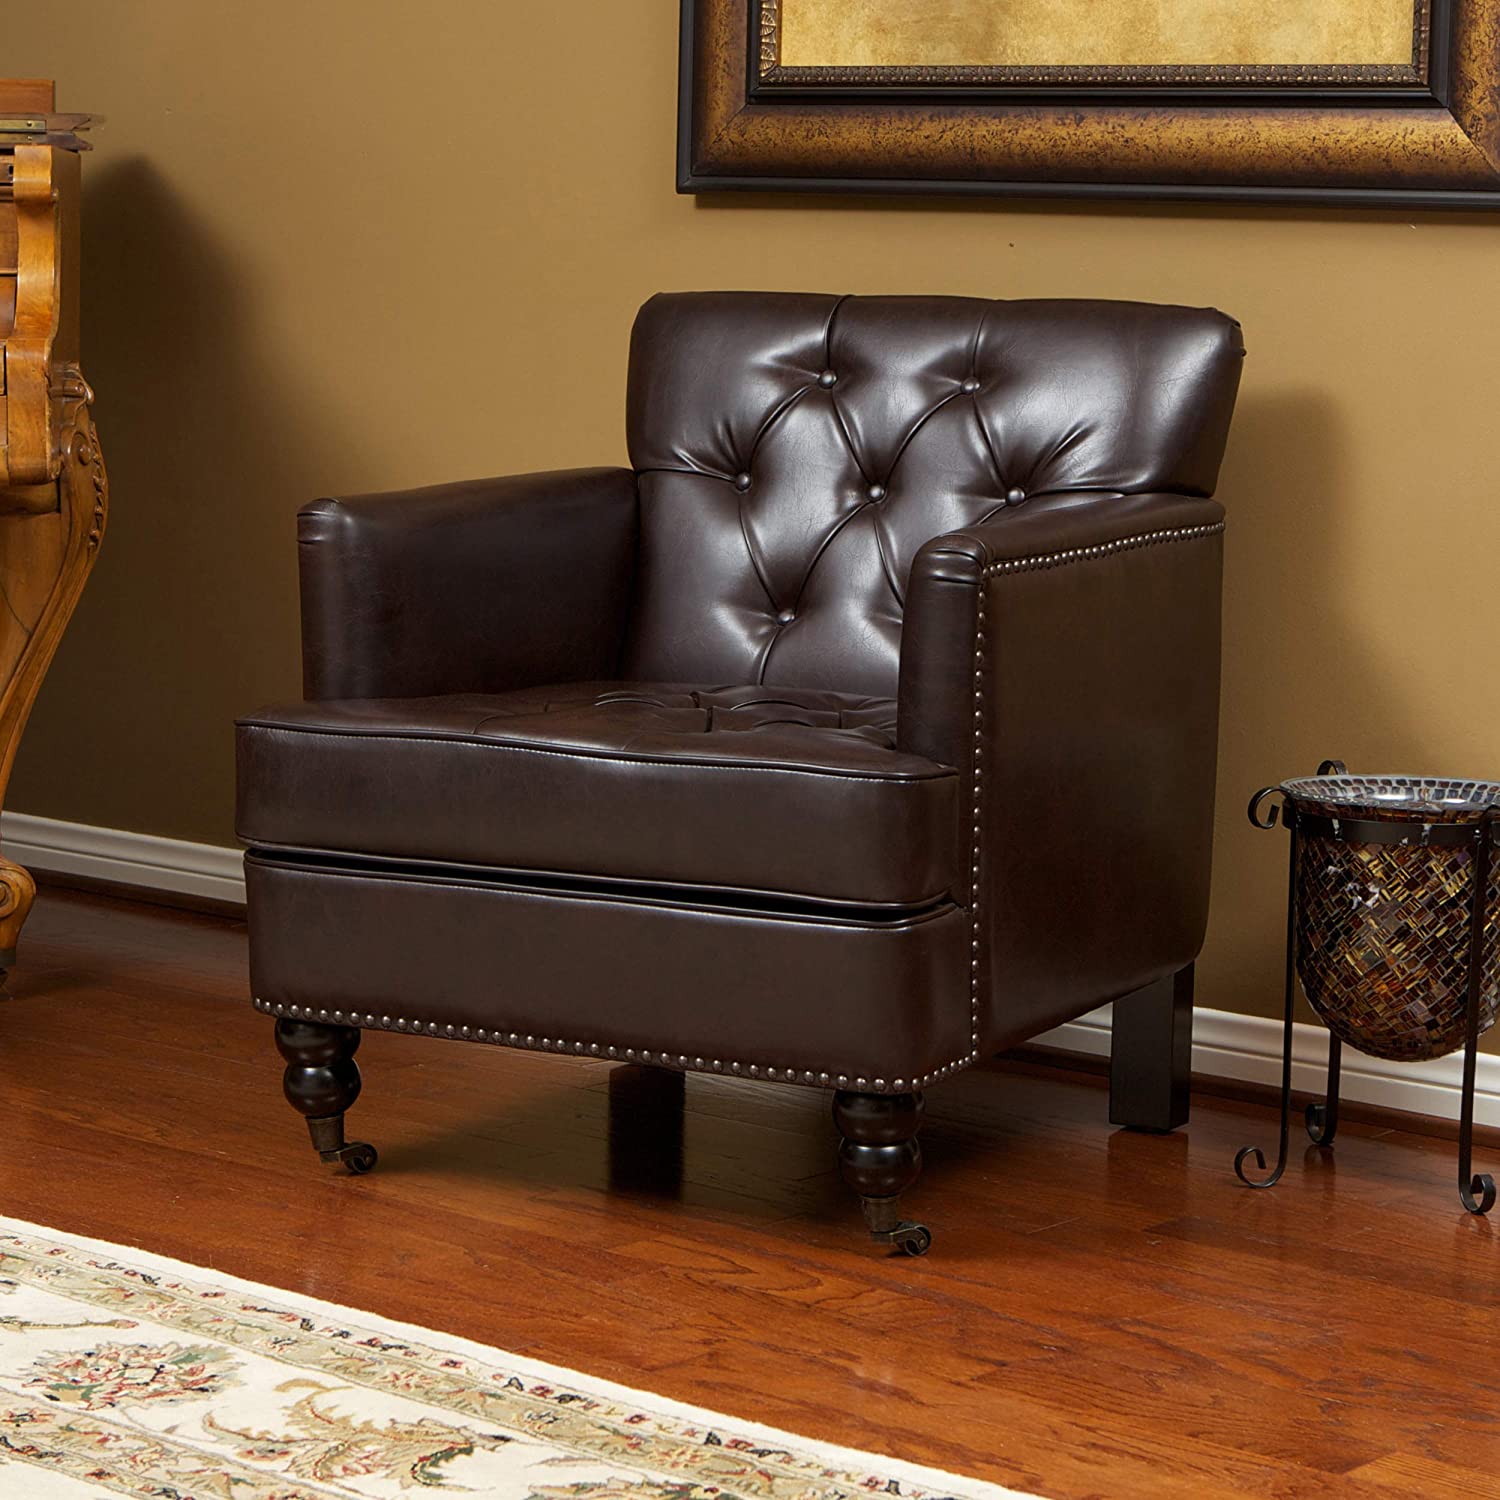 Wide Tufted Upholstery Club Chair with Arm Rest , Brown